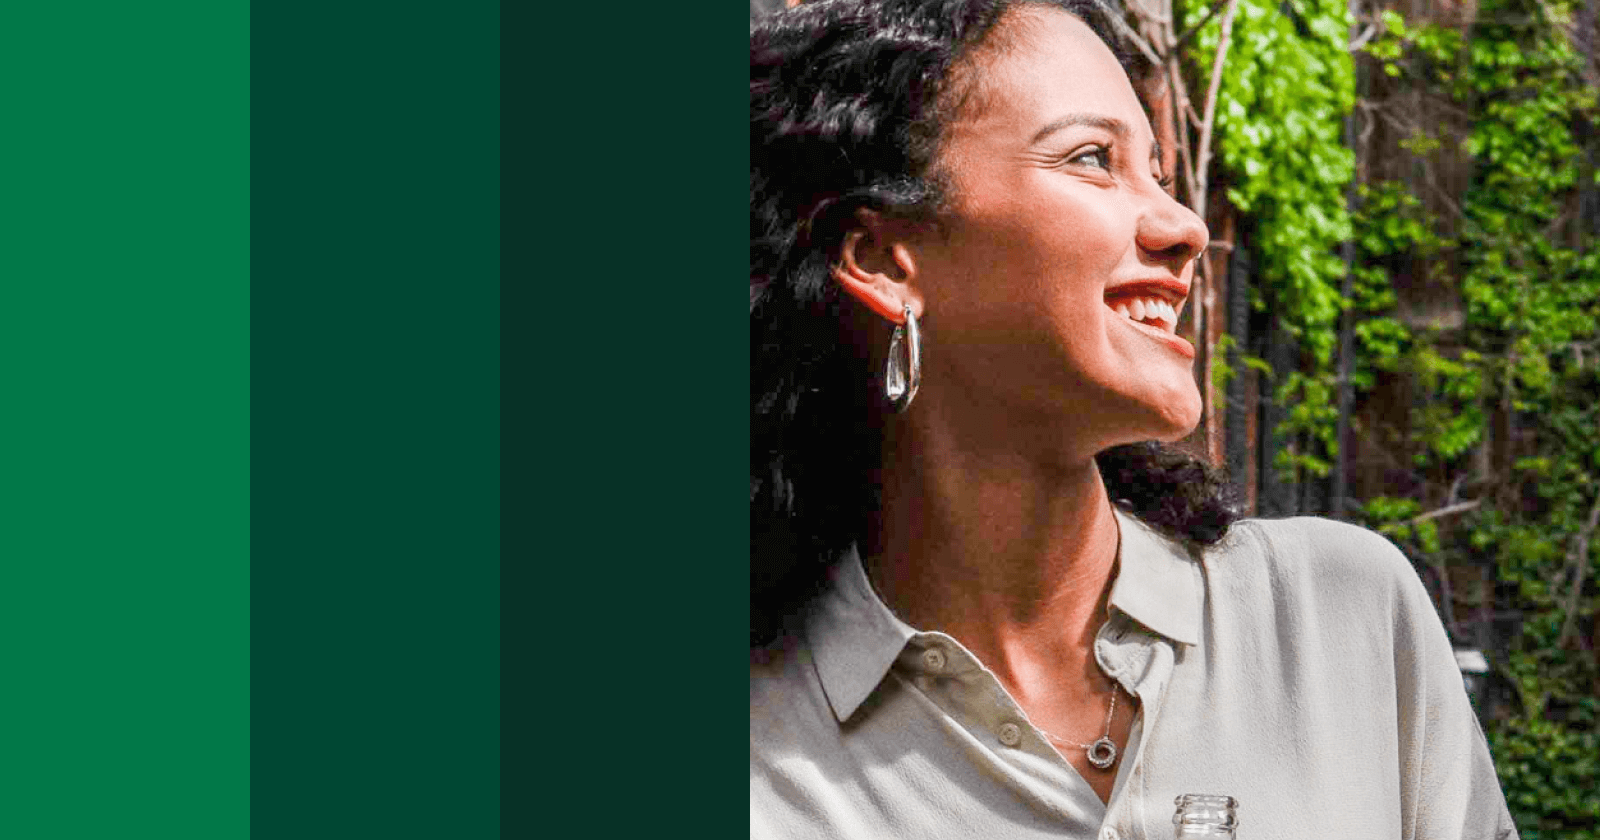 Three Vertical Bars of Different Shades of Green on Left and a Profile of a Person Smiling